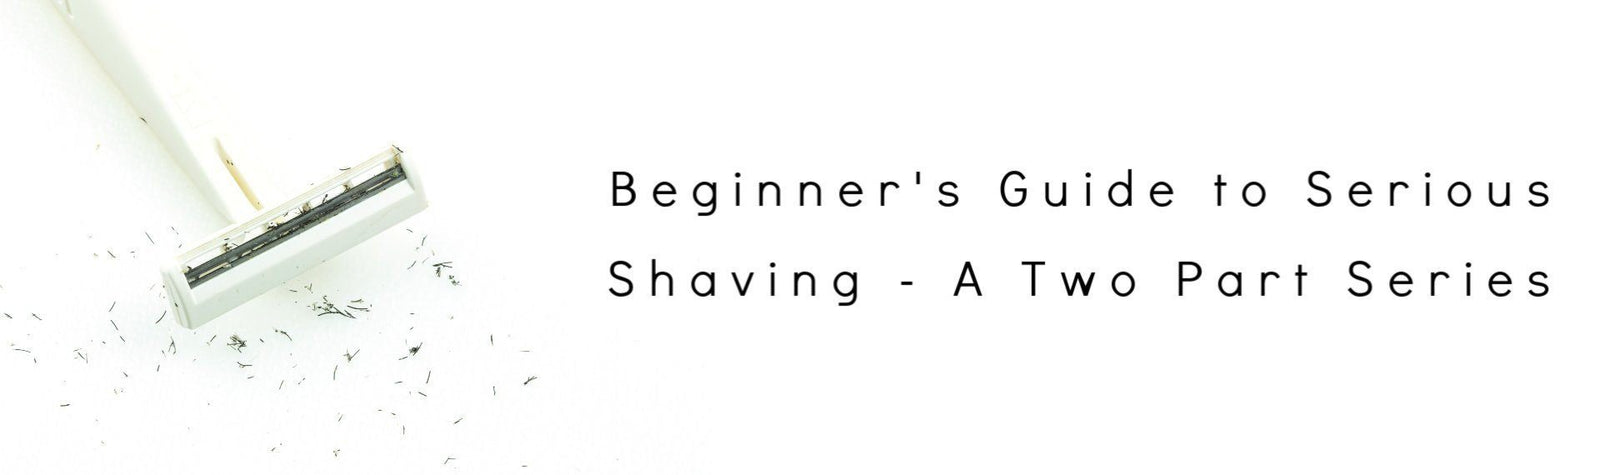 Mountaineer Brand-A Beginner's Guide to Serious Shaving - Part 2